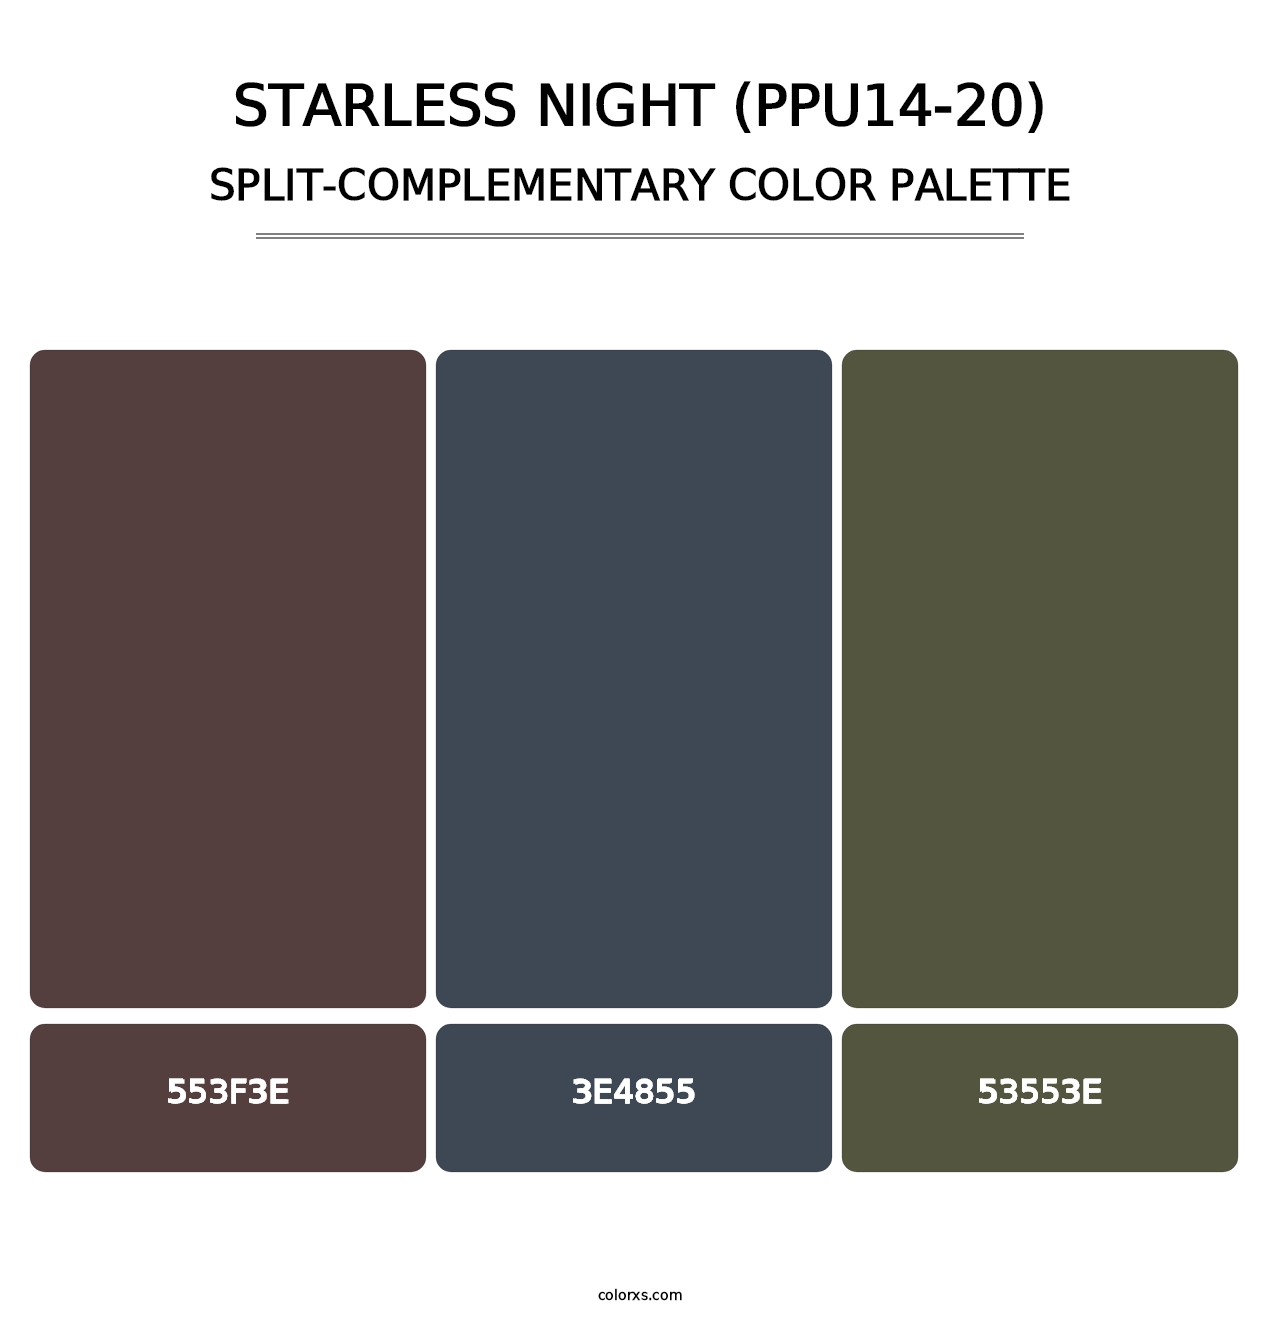 Starless Night (PPU14-20) - Split-Complementary Color Palette